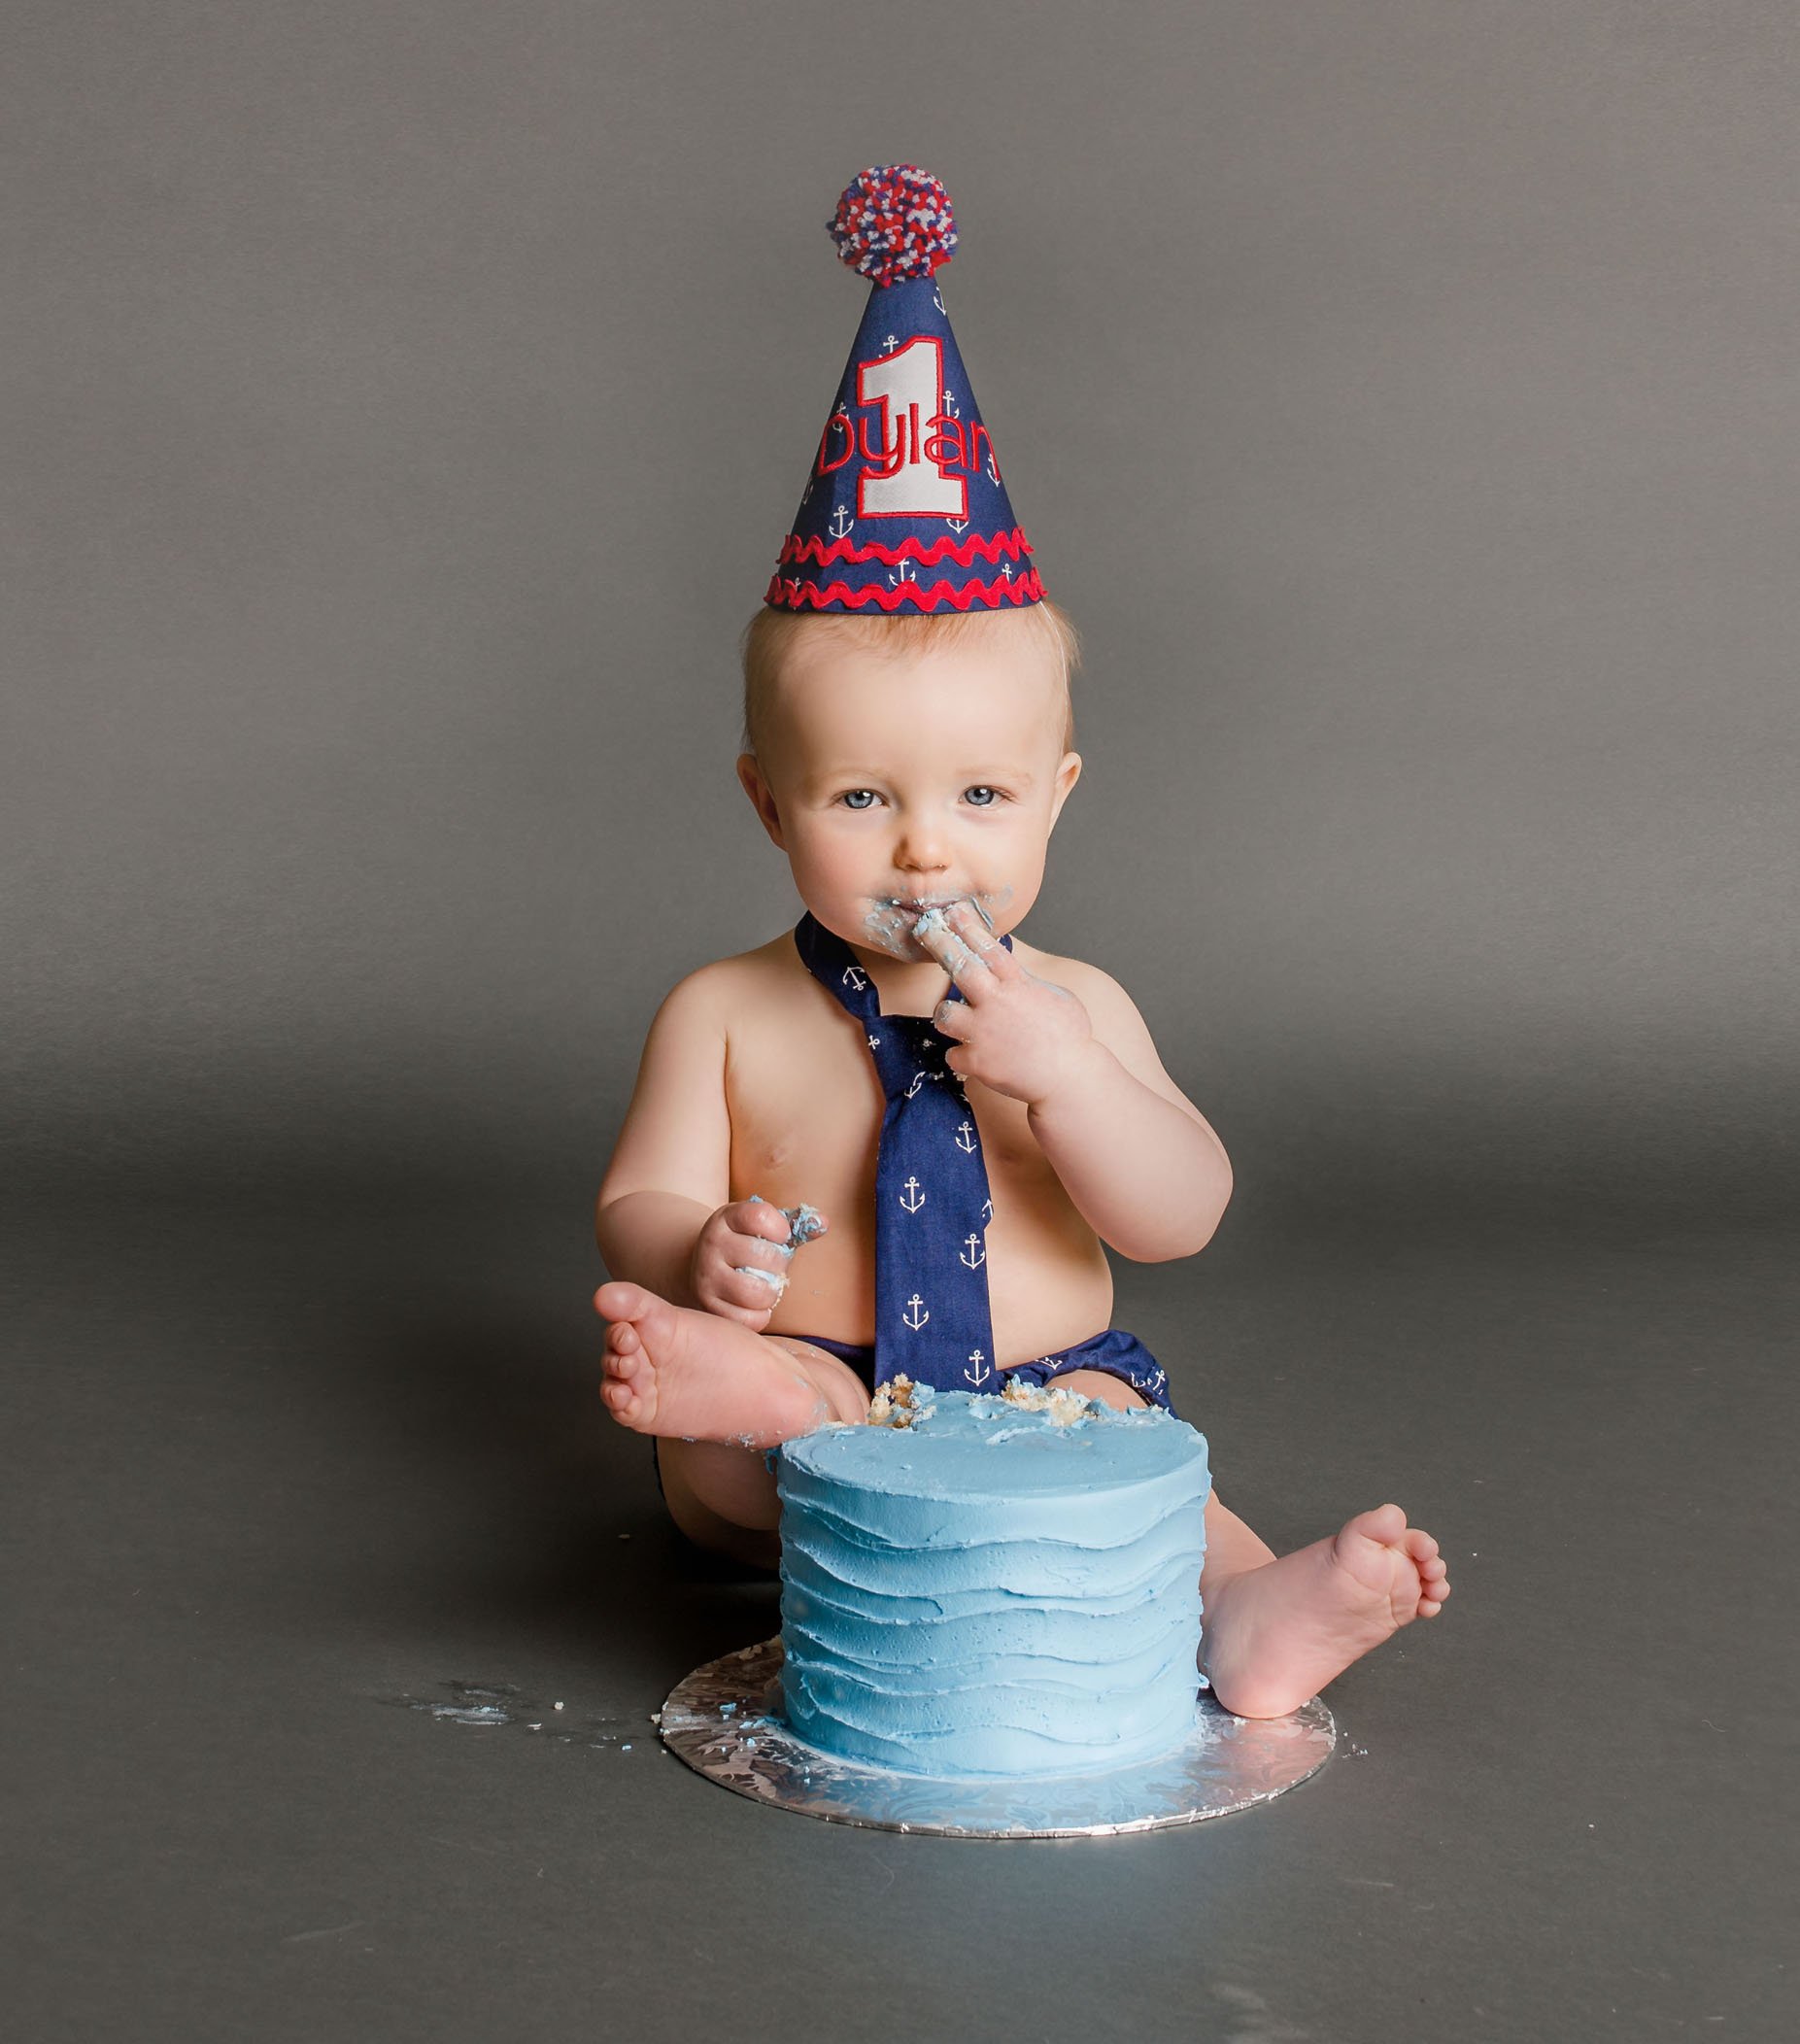 Baby tasting cake with fingers and feet in cake One Big Happy Photo